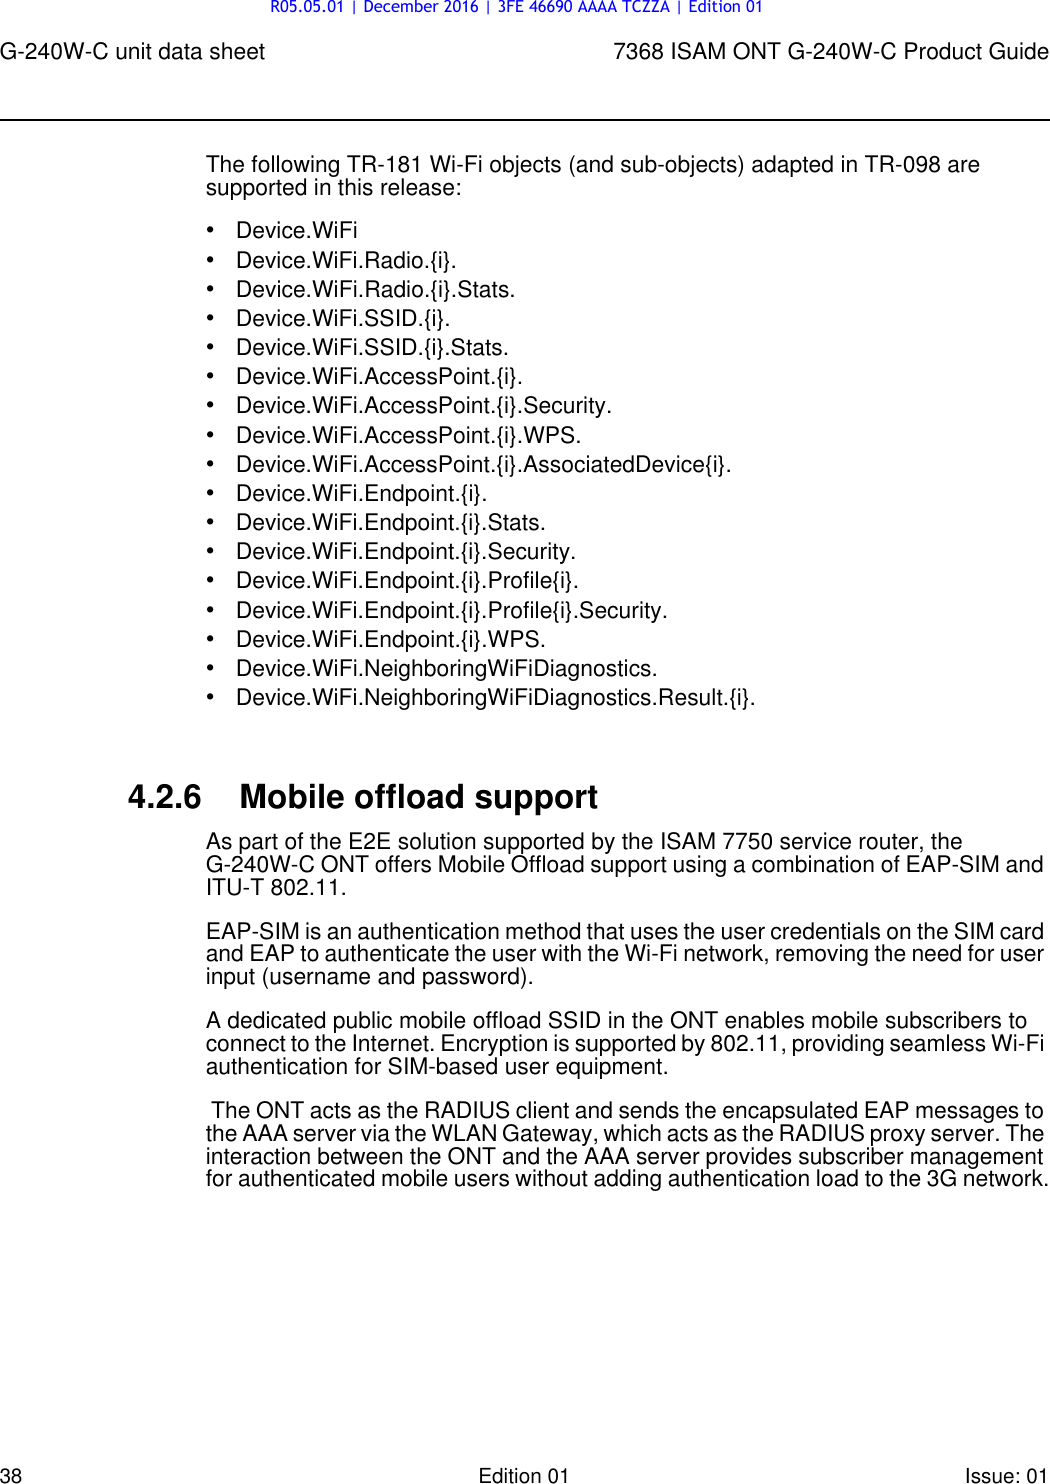 Page 38 of Nokia Bell G240W-C GPON ONU User Manual 7368 ISAM ONT G 240W B Product Guide